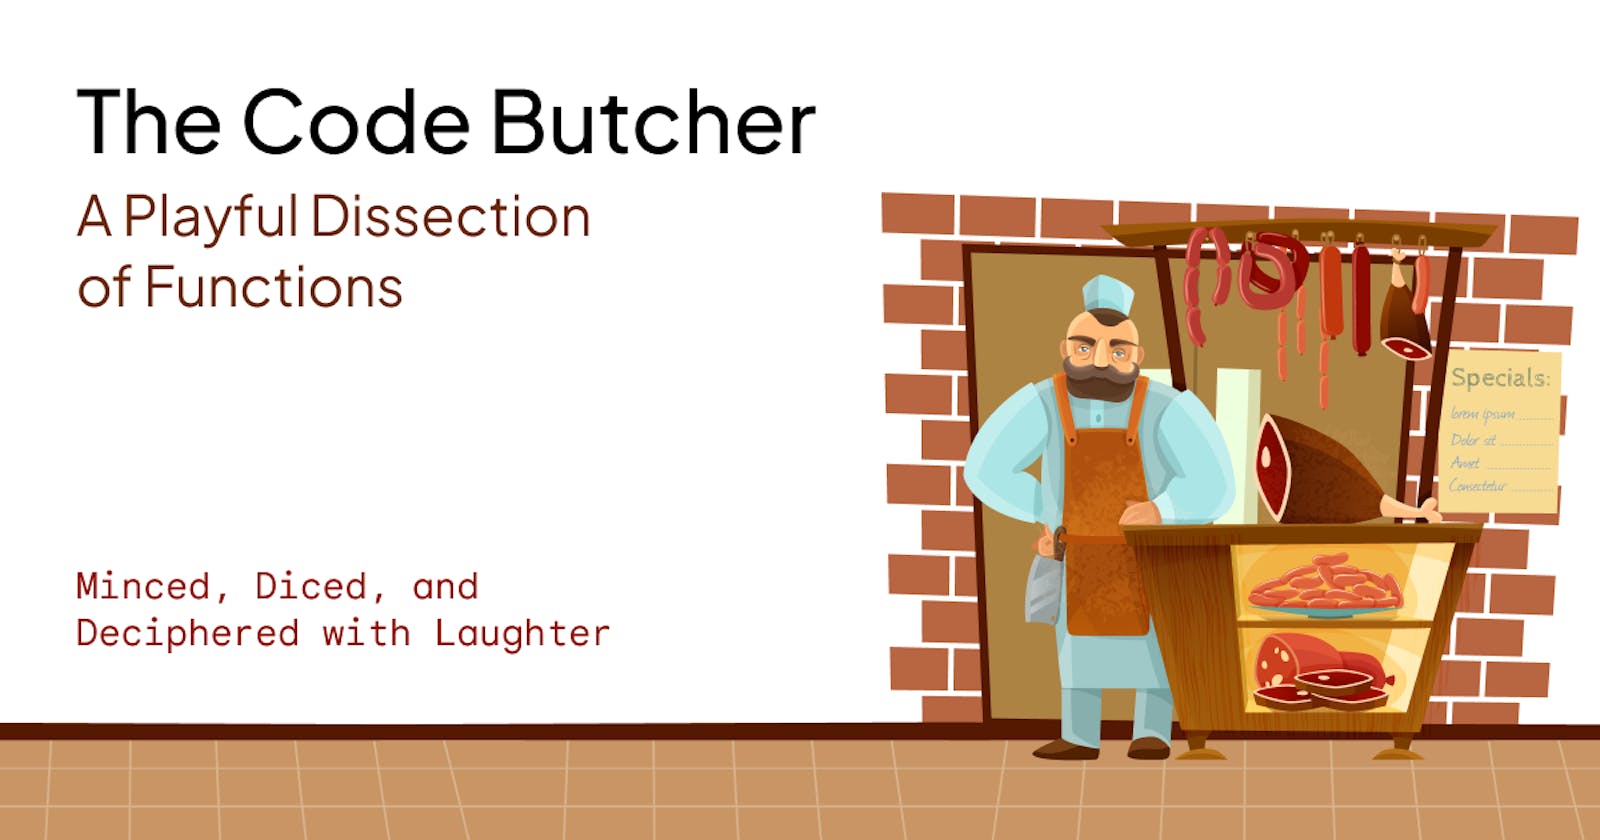 The Code Butcher: A Playful Dissection of Functions